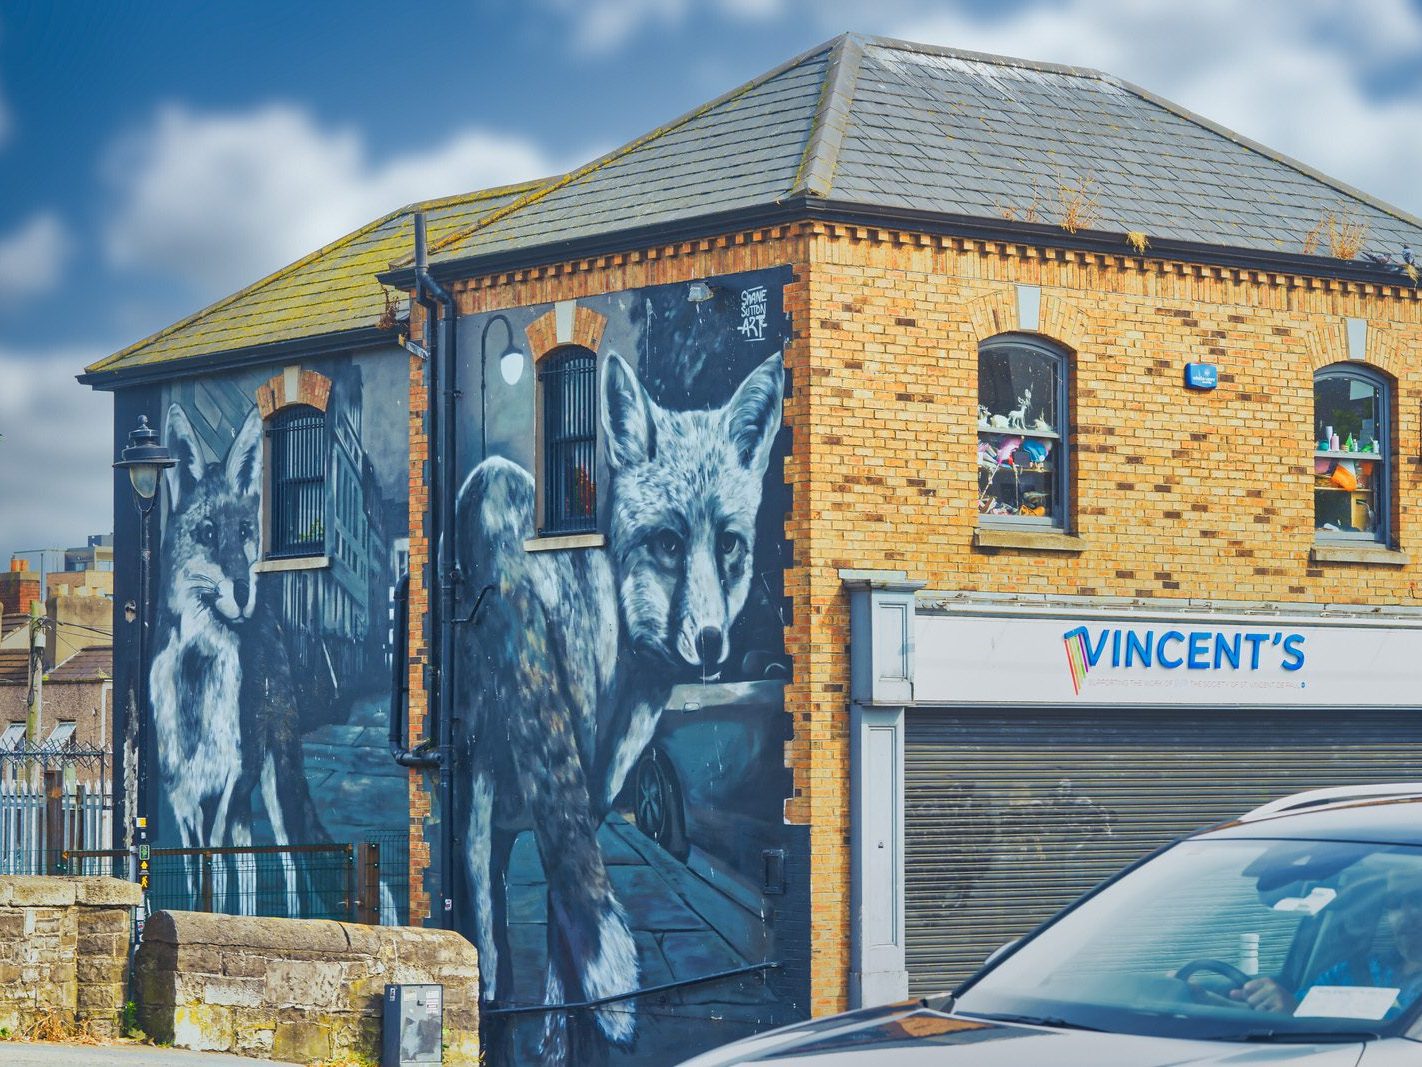 CITY FOXES BY SHANE SUTTON [VINCENT'S DRUMCONDRA END OF DORSET STREET] 004